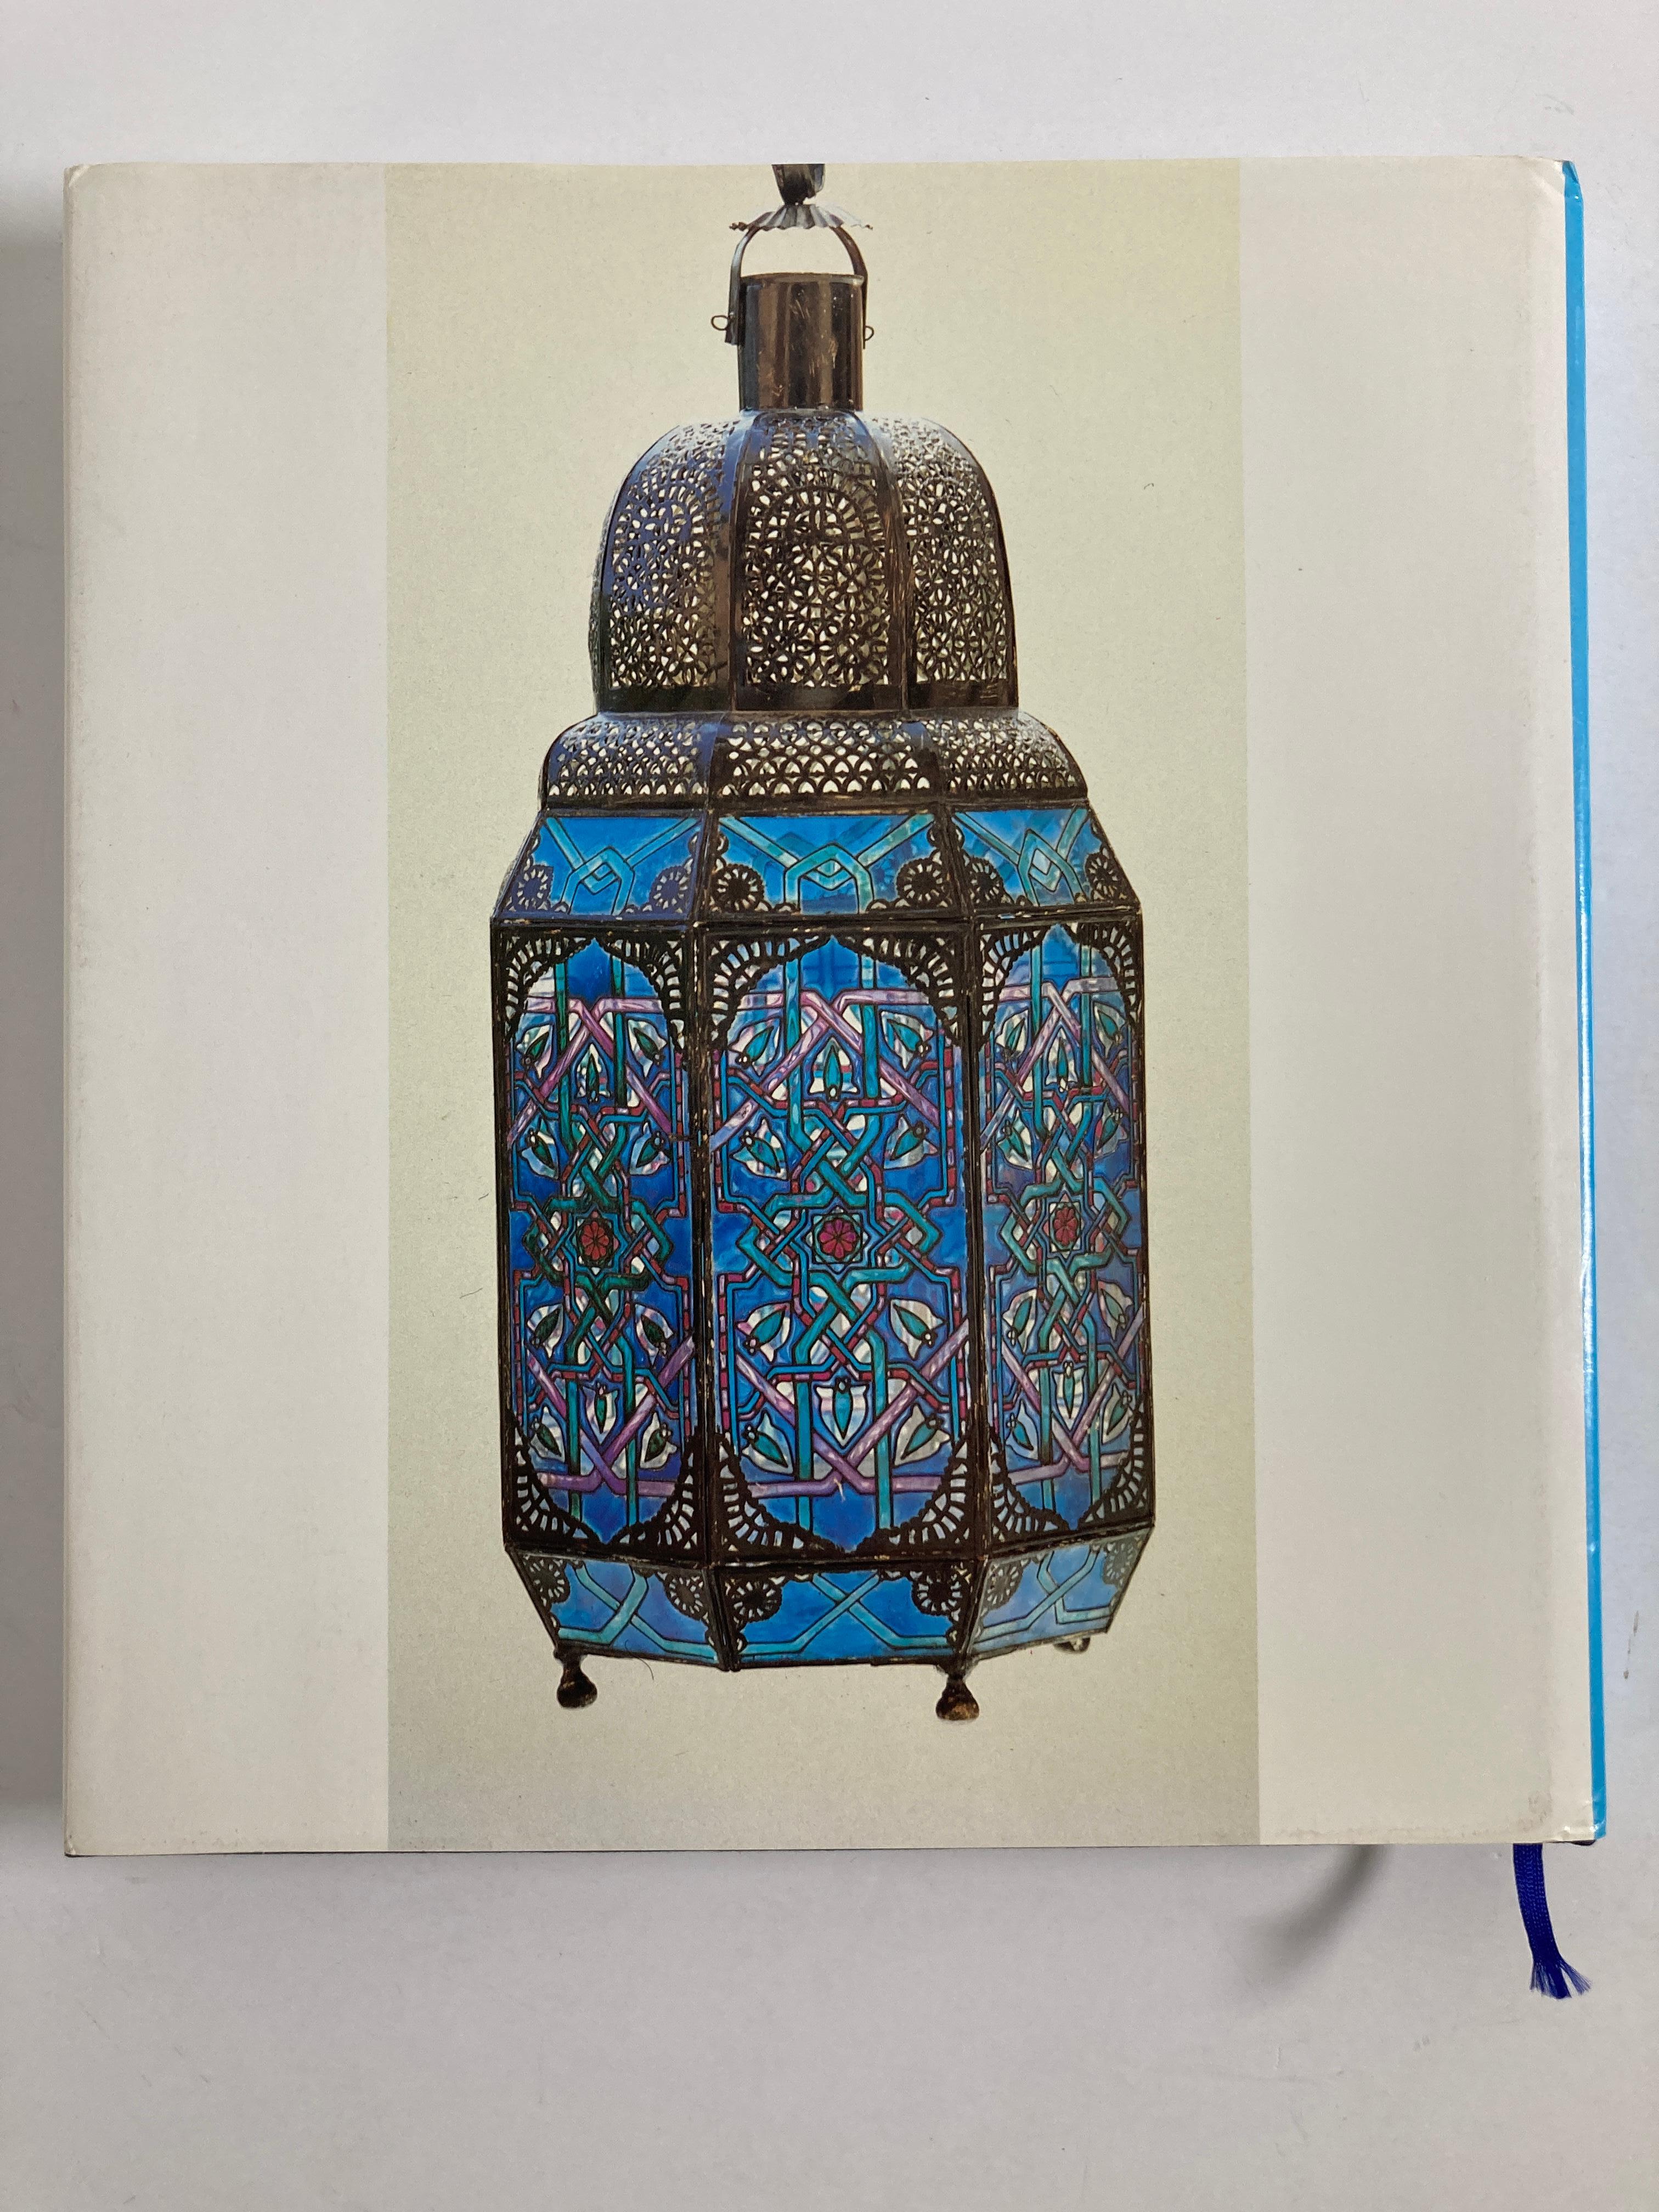 Les arts traditionnels au Maroc.
(Traditional Arts in Morocco)
(French edition) By Dr. Mohamed Sijelmassi
264 pages, 317 large color photographs of jewelry, furniture, ceramics objects, textiles, tiles, and other examples of traditional Moroccan